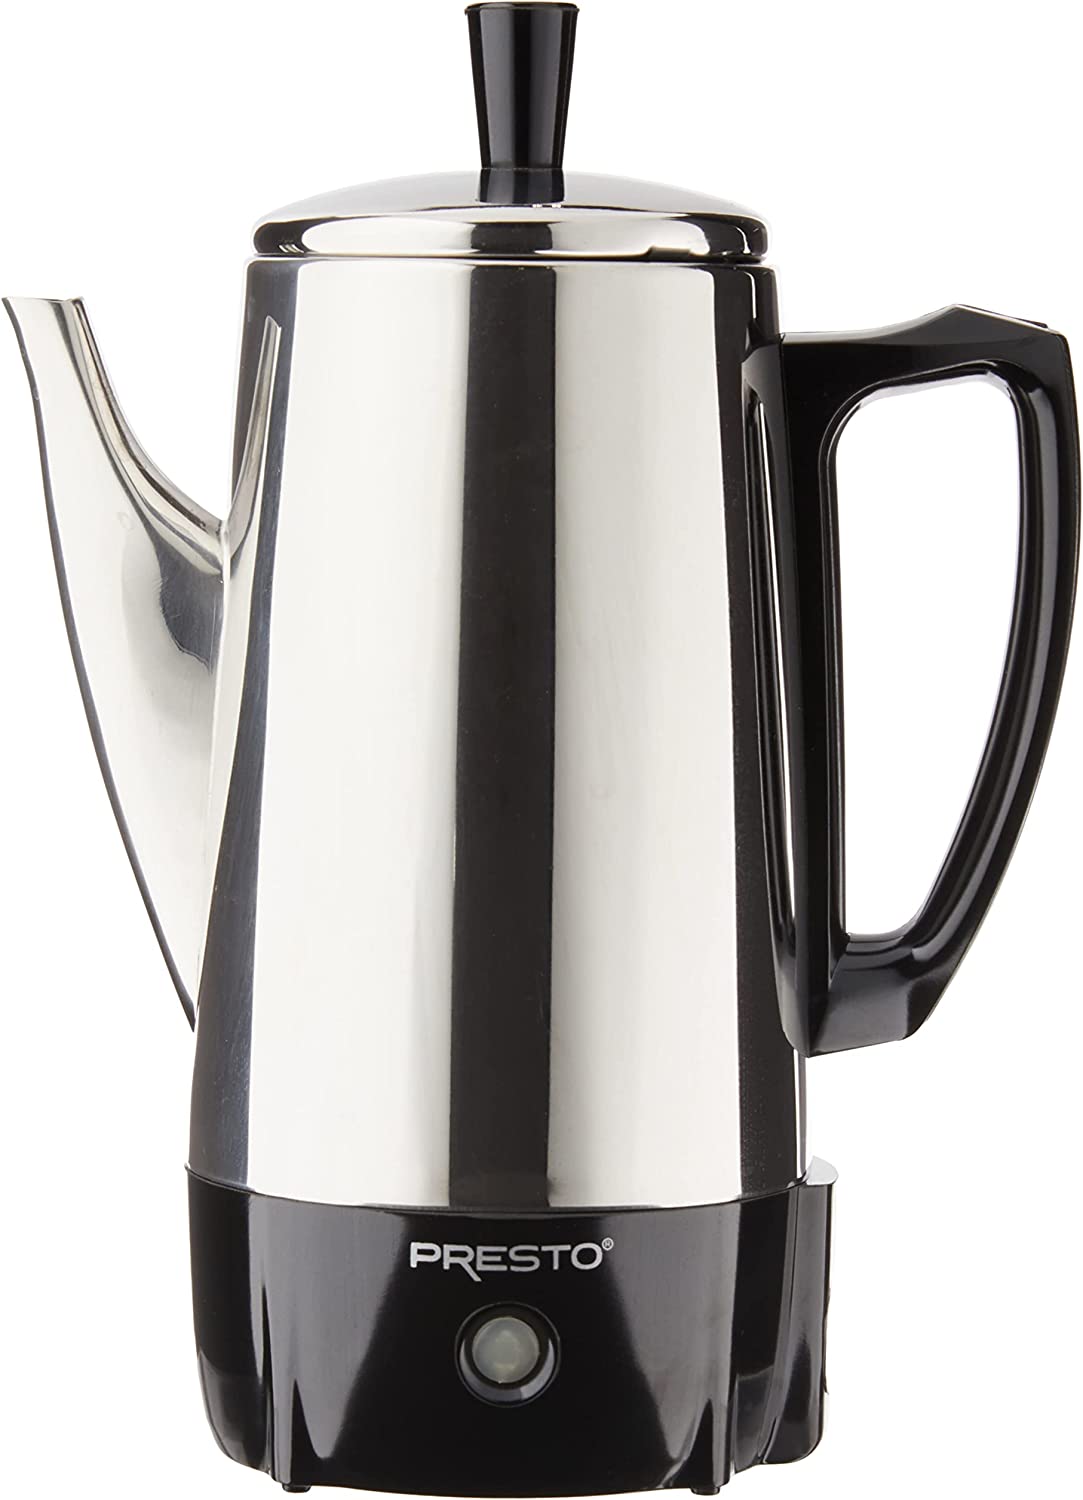 Presto 6-Cup Stainless-Steel Coffee Percolator - image 1 of 4